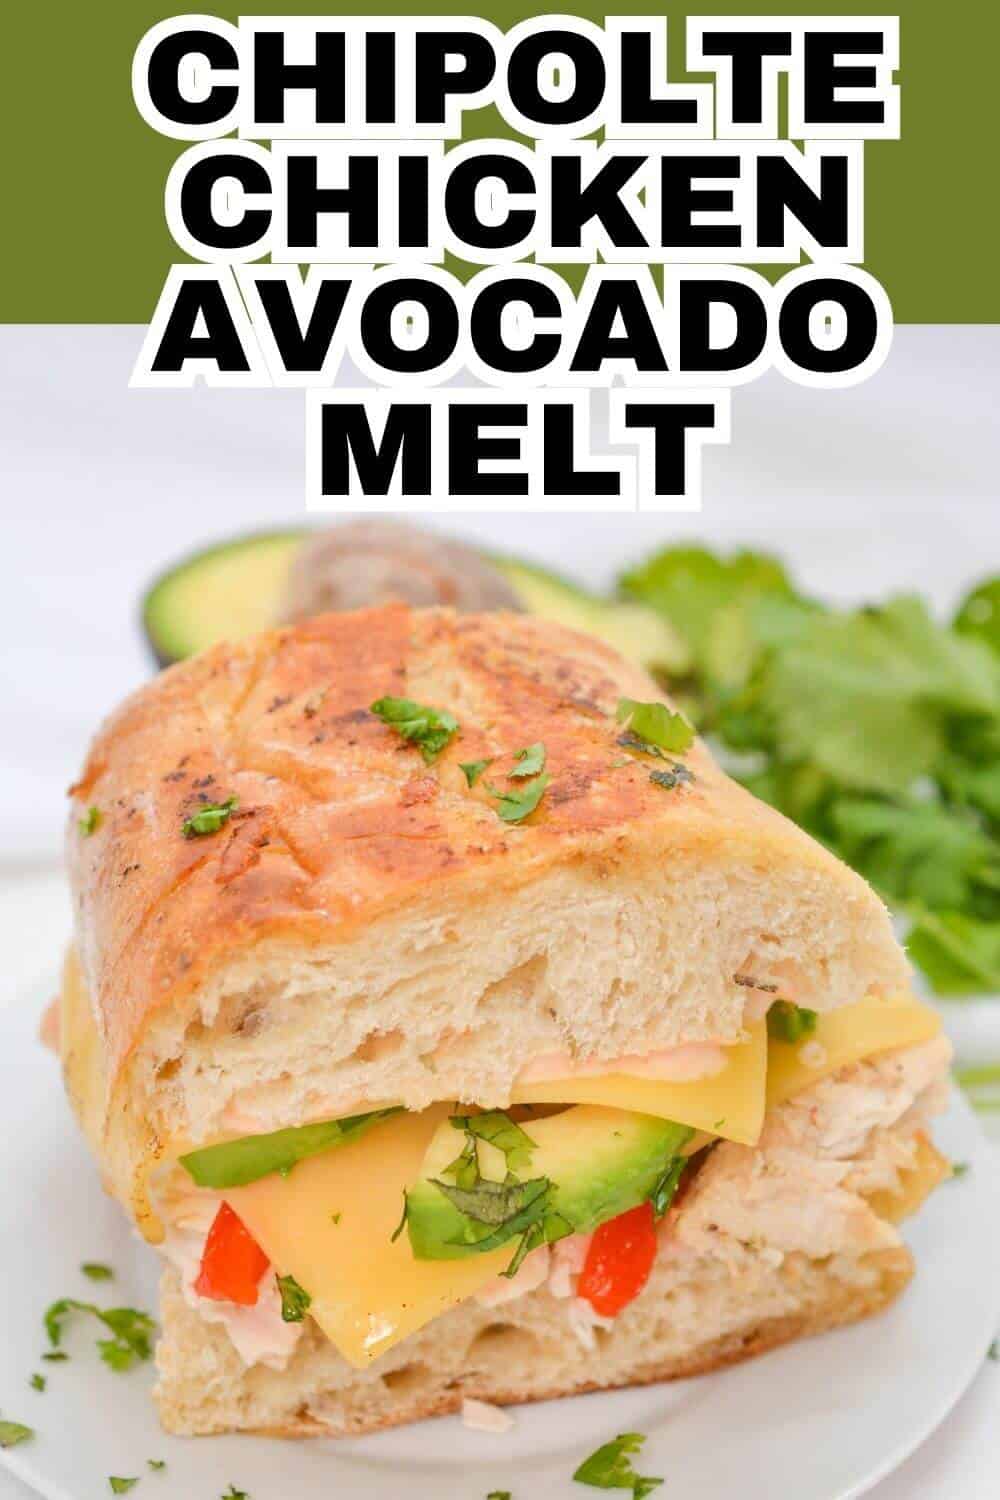 Chipotle chicken avocado melt with recipe title text.